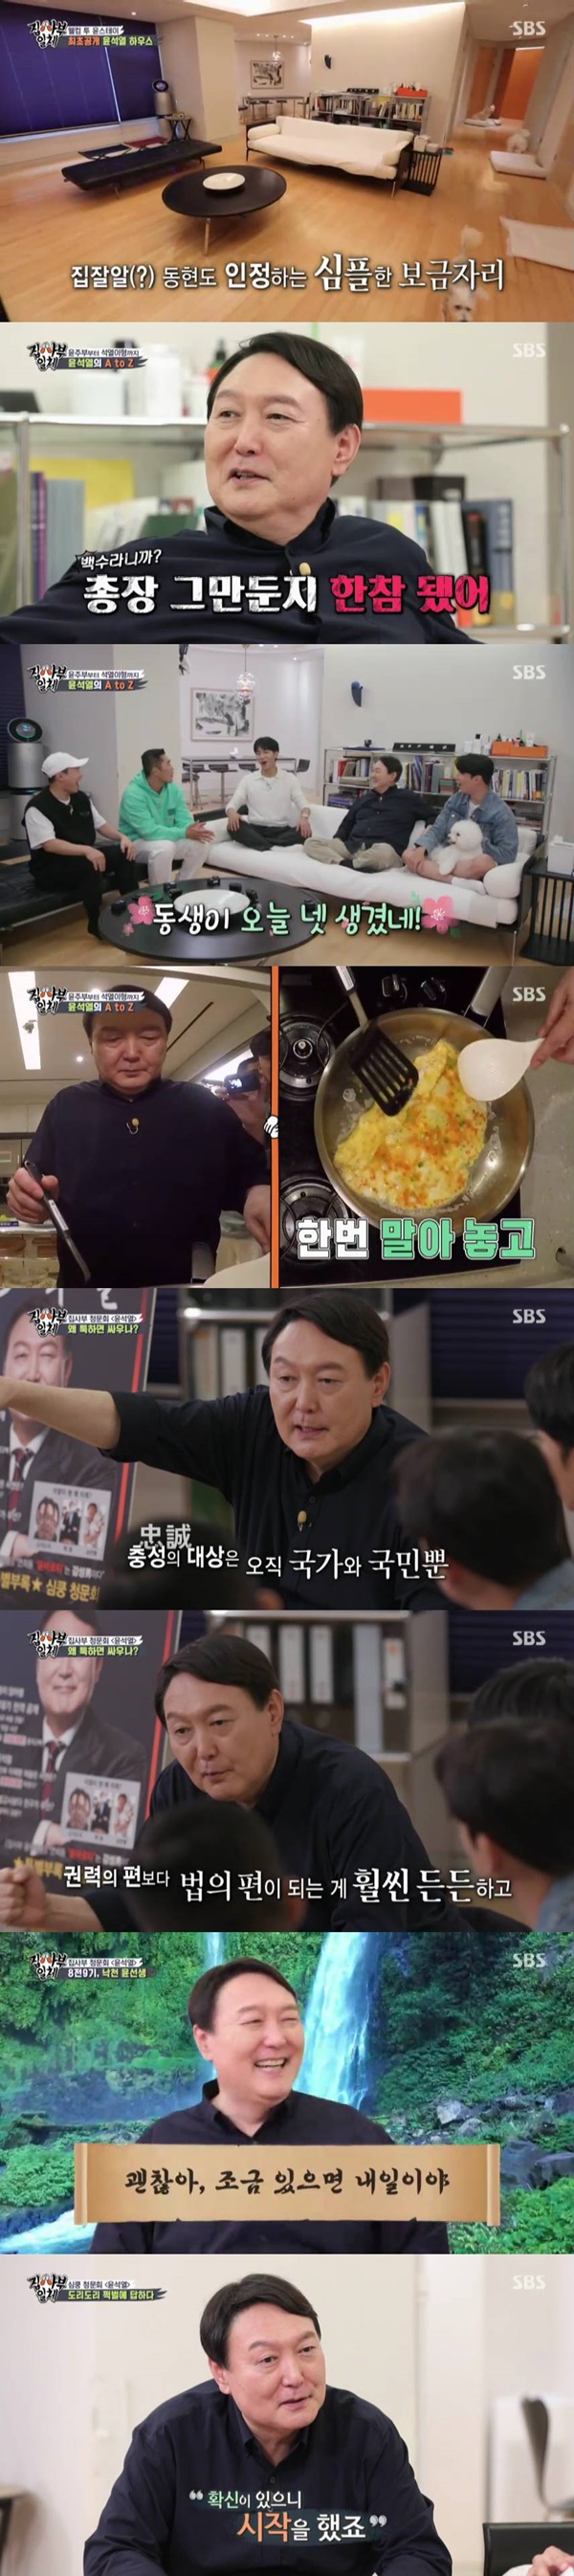 TV viewer ratings have risen sharply, with All The Butlers being featured as a presidential candidate and former prosecutor general Yoon Seok-ryul appearing as a master.According to Nielsen Korea, a TV viewer rating research company on the 20th, SBS entertainment All The Butlers, which was broadcast the previous day, recorded 7.4% (based on the national standard) TV viewer ratings.Top TV viewer ratings per minute soared to 12.1 per cent.This is a sharp increase from the 3.6% recorded by the last broadcast, and All The Butlers recorded the highest TV viewer ratings in six months.The broadcast was featured in the presidential election.The news that three of the most supportive presidential candidates who declared their candidacy for the 20th presidential election was known to appear, and the first runner on the day, former prosecutor general Yoon Seok-ryul appeared.Asked about the resignation of the prosecutor general and the presidential candidacy, Yoon Seok-ryul said, It is difficult to decide to run.It is not normal, he said, after a long time of trouble after his retirement, he decided to run for the presidential election.Our generation was able to buy an Apartment if we went to the company for about 10 years, but it became too difficult to get a house for the fortress, said Yoon Seok-ryul. If a young person does not have hope, the society is dead.I have to make a change in such a problem. He said, I tend to be a little scared when I do new things.I have a lot of shortcomings, but I am confident that I can push it in the direction I think without giving up. A hearing was later held to intensively explore Master Yoon Seok-ryul.First, Yoon Seok-ryul talked about his representative quote: Im not loyal to people; he tells his juniors, The prosecutor should not be loyal to people.People, I say, are human rights, he said. The object of loyalty is only the nation and the people.Yoon Seok-ryul said, The chicken is important to the opponent, but it is with the president.There is no reason to challenge the president, he said. It is much more secure to be on the side of the law than the side of power.If the law of the powerful is not properly handled, the people can not be told to keep the law, and society is in turmoil. It is important how much the investigation into the powerful is based on principle.It should be based on the principle unconditionally. In addition, the hearing focused on keywords related to Jangcheon, 8th and 9th, and Doridori.In the meantime, when asked if there was anything he wanted to take away from Lee Jae-myung and Lee Nak-yeon, who foreshadowed the appearance of the presidential candidate, Yoon Seok-ryul answered frankly, I want to resemble Lee Nak-yeon and Lee Jae-myung.Such a young seak-ryul replied, Yes to the question I am the 20th president of the Republic of Korea.I have to show you more, but I have seen you doing well so far, so you will have the belief that you will do well. Finally, Yoon Seok-ryul asked, If I become president, I will not do this. Sharing rice together is the basis of communication.I will always communicate with many people, such as opposition parties, journalists, and people who need encouragement. He said, I will not eat rice. He said, I will not hide in front of the people, whether I did well or wrong. The All The Butlers presidential feature will be followed by former prosecutor general Yoon Seok-ryul, Lee Jae-myung Gyeonggi Governor on 26th, and Lee Nak-yeon on October 3rd.